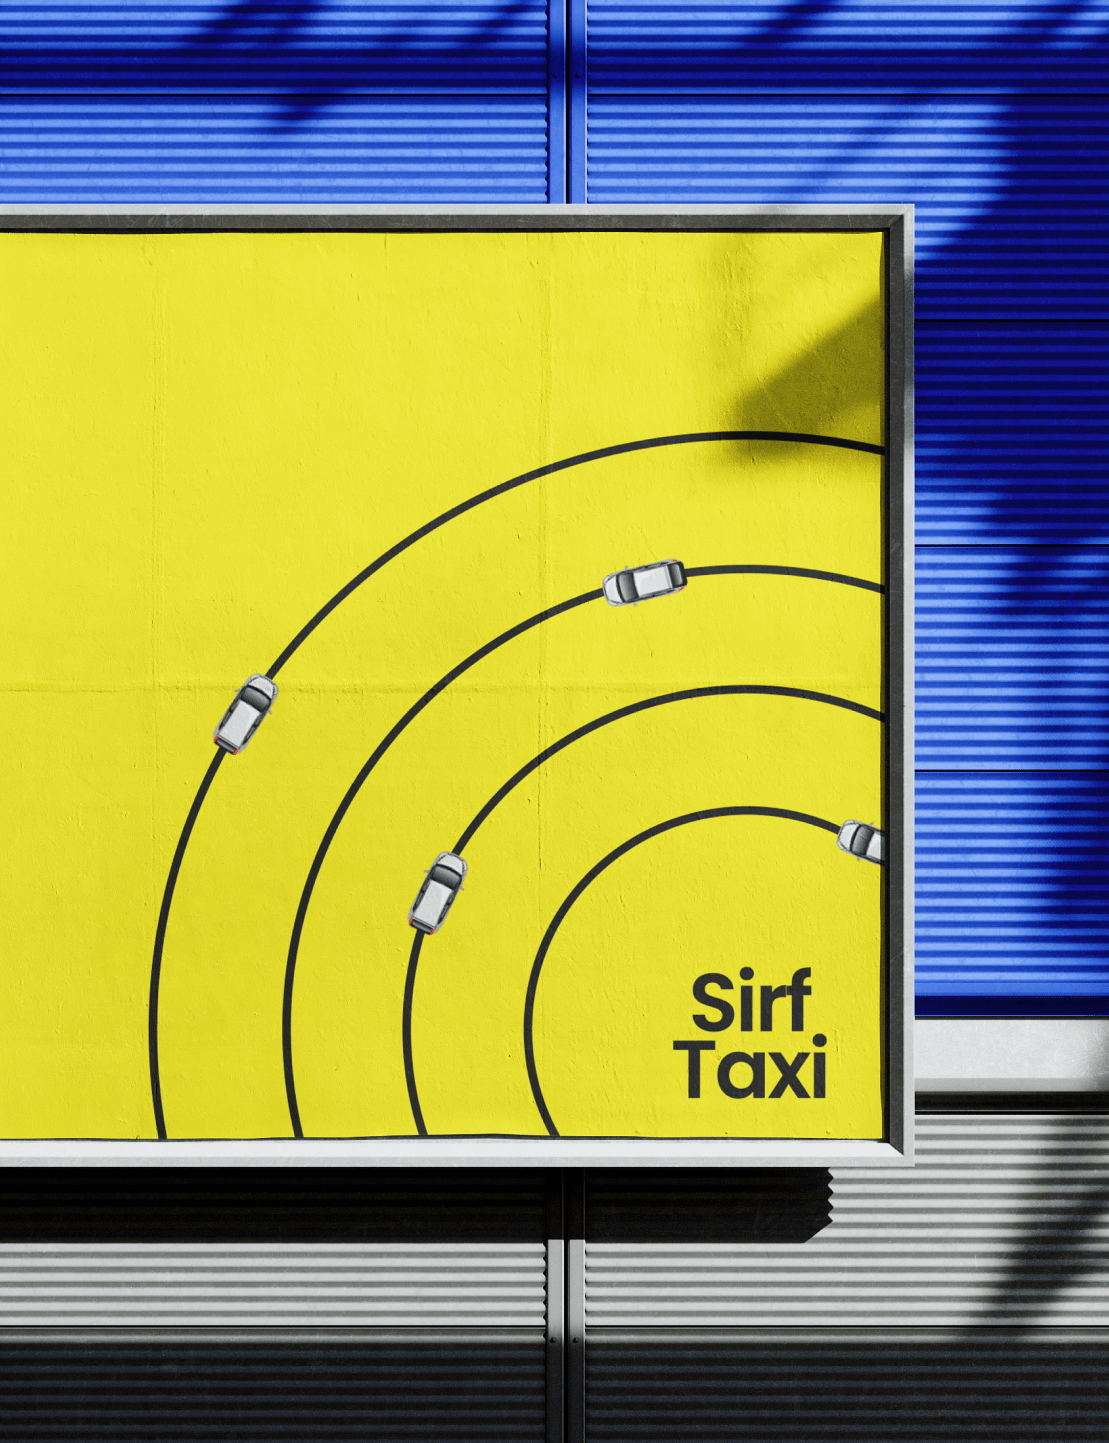 SIRF TAXI APPLICATION, BRANDING